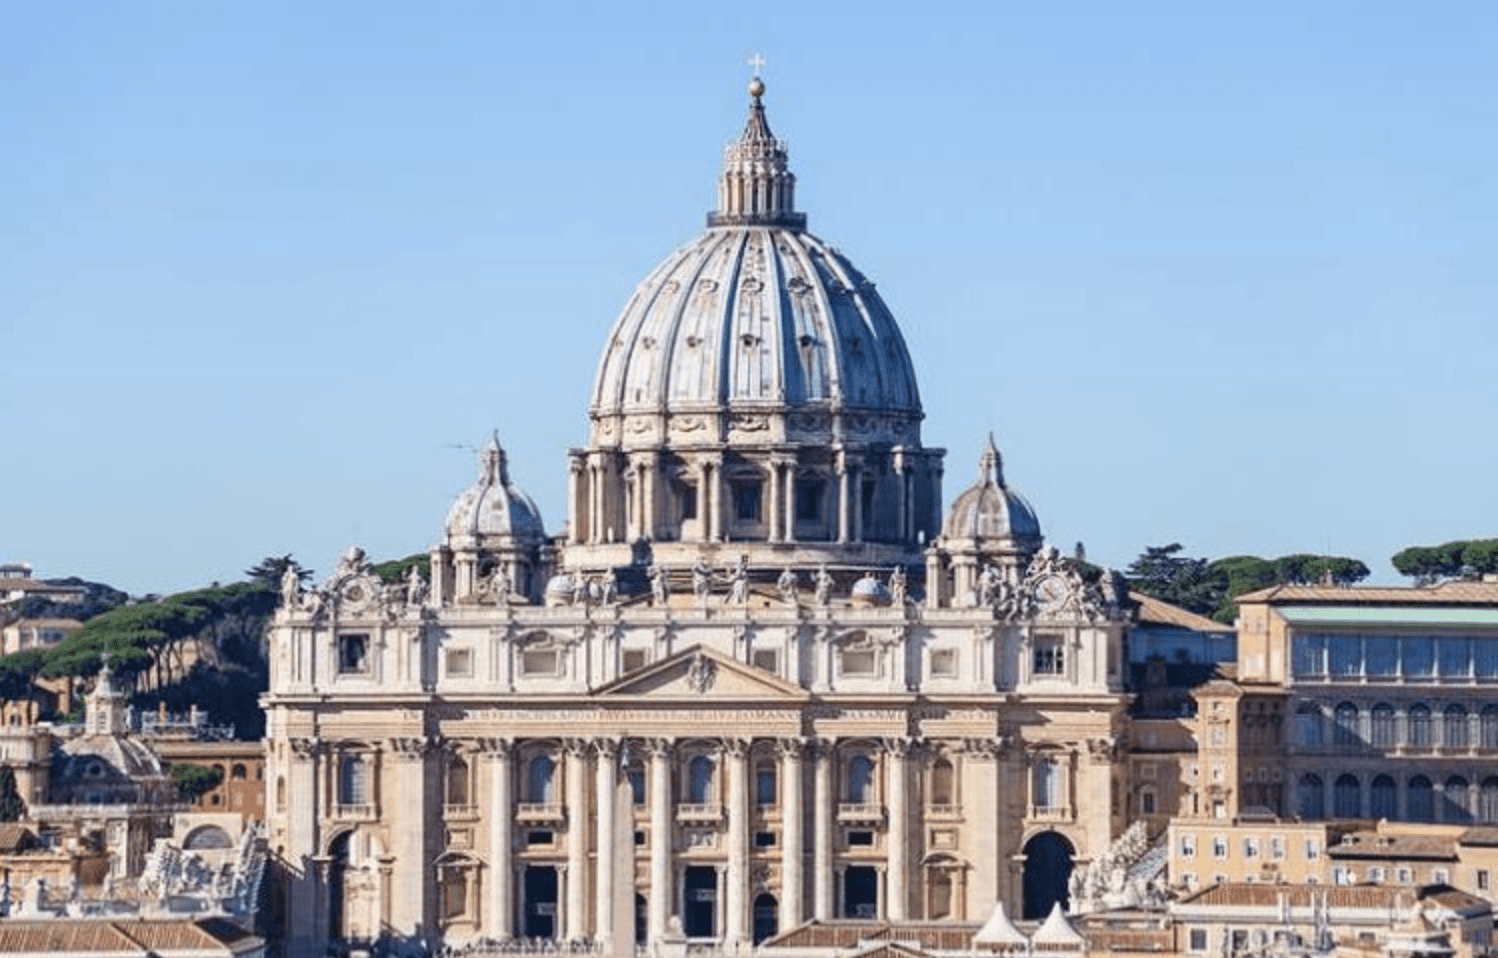 Questions Continue Over Decree Ending Private Masses at St. Peter’s